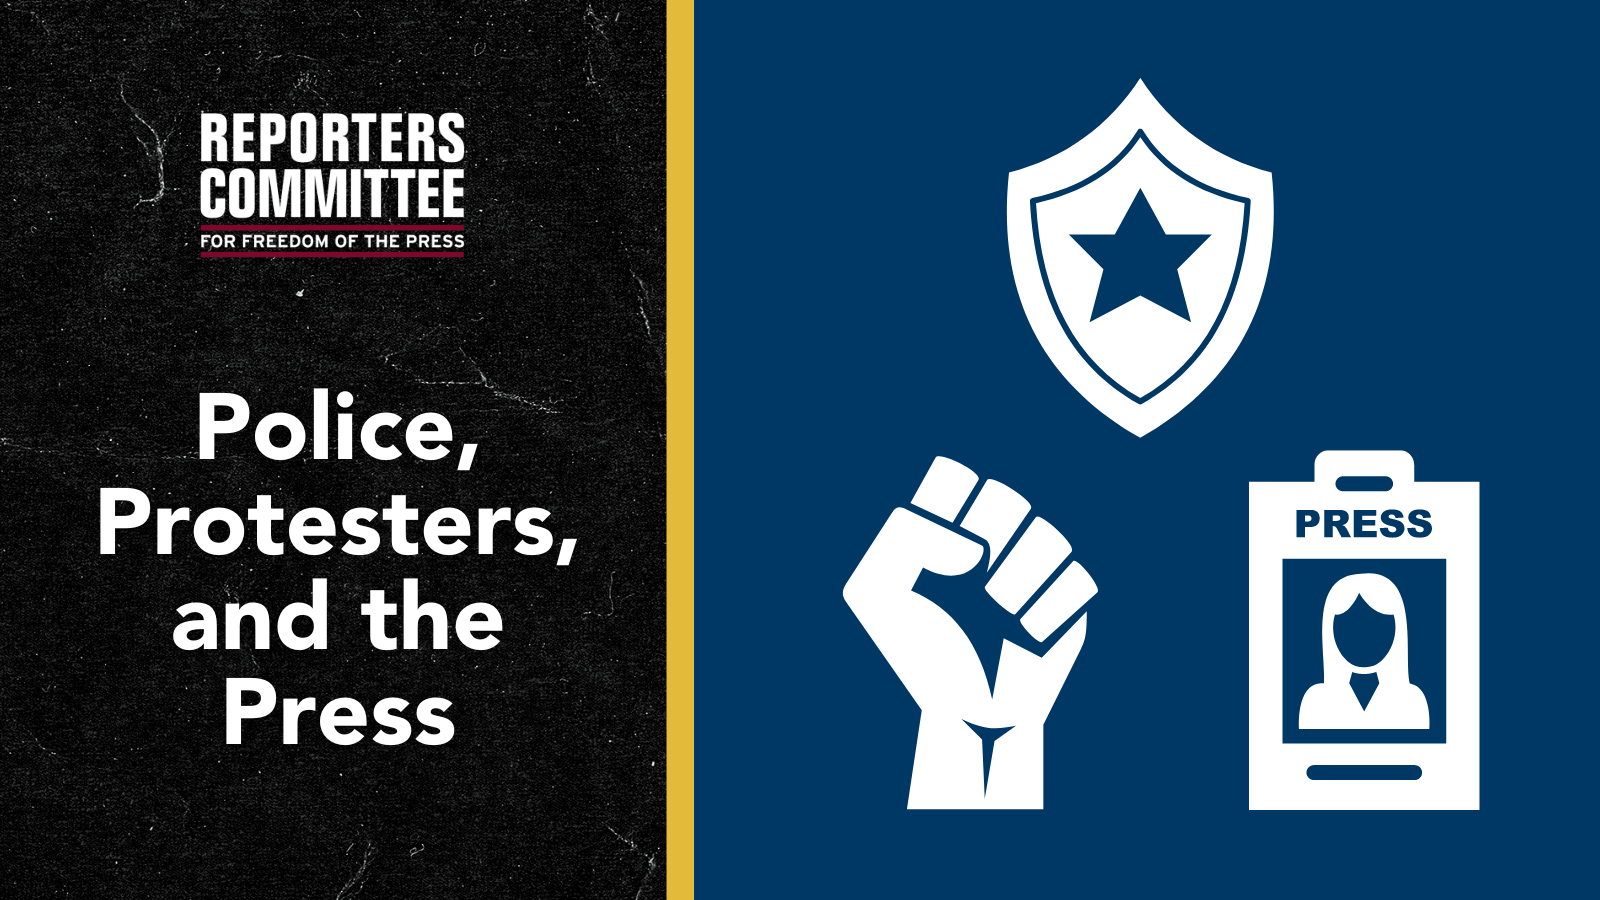 A split graphic with the text "Police, Protestors, and the Press" on the left and symbols for a police badge, fist, and press badge on the right.